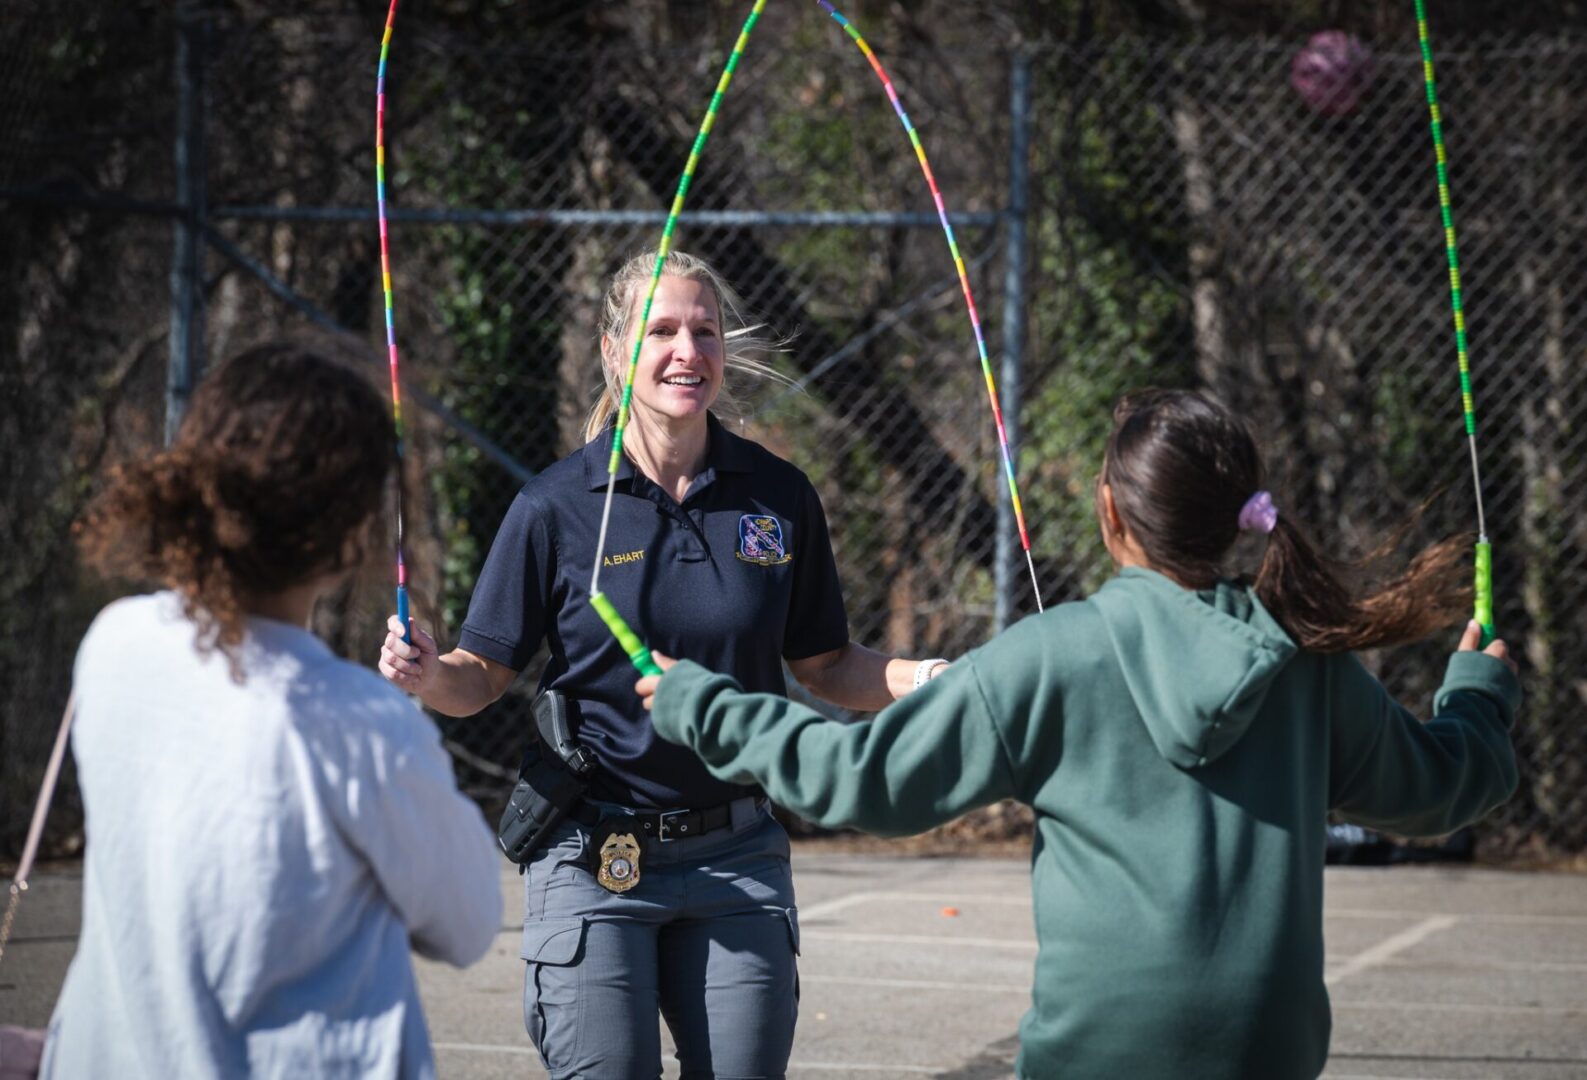 A police officer engages in a community athletic program with a group of girls, participating in a lively hula hoop session.